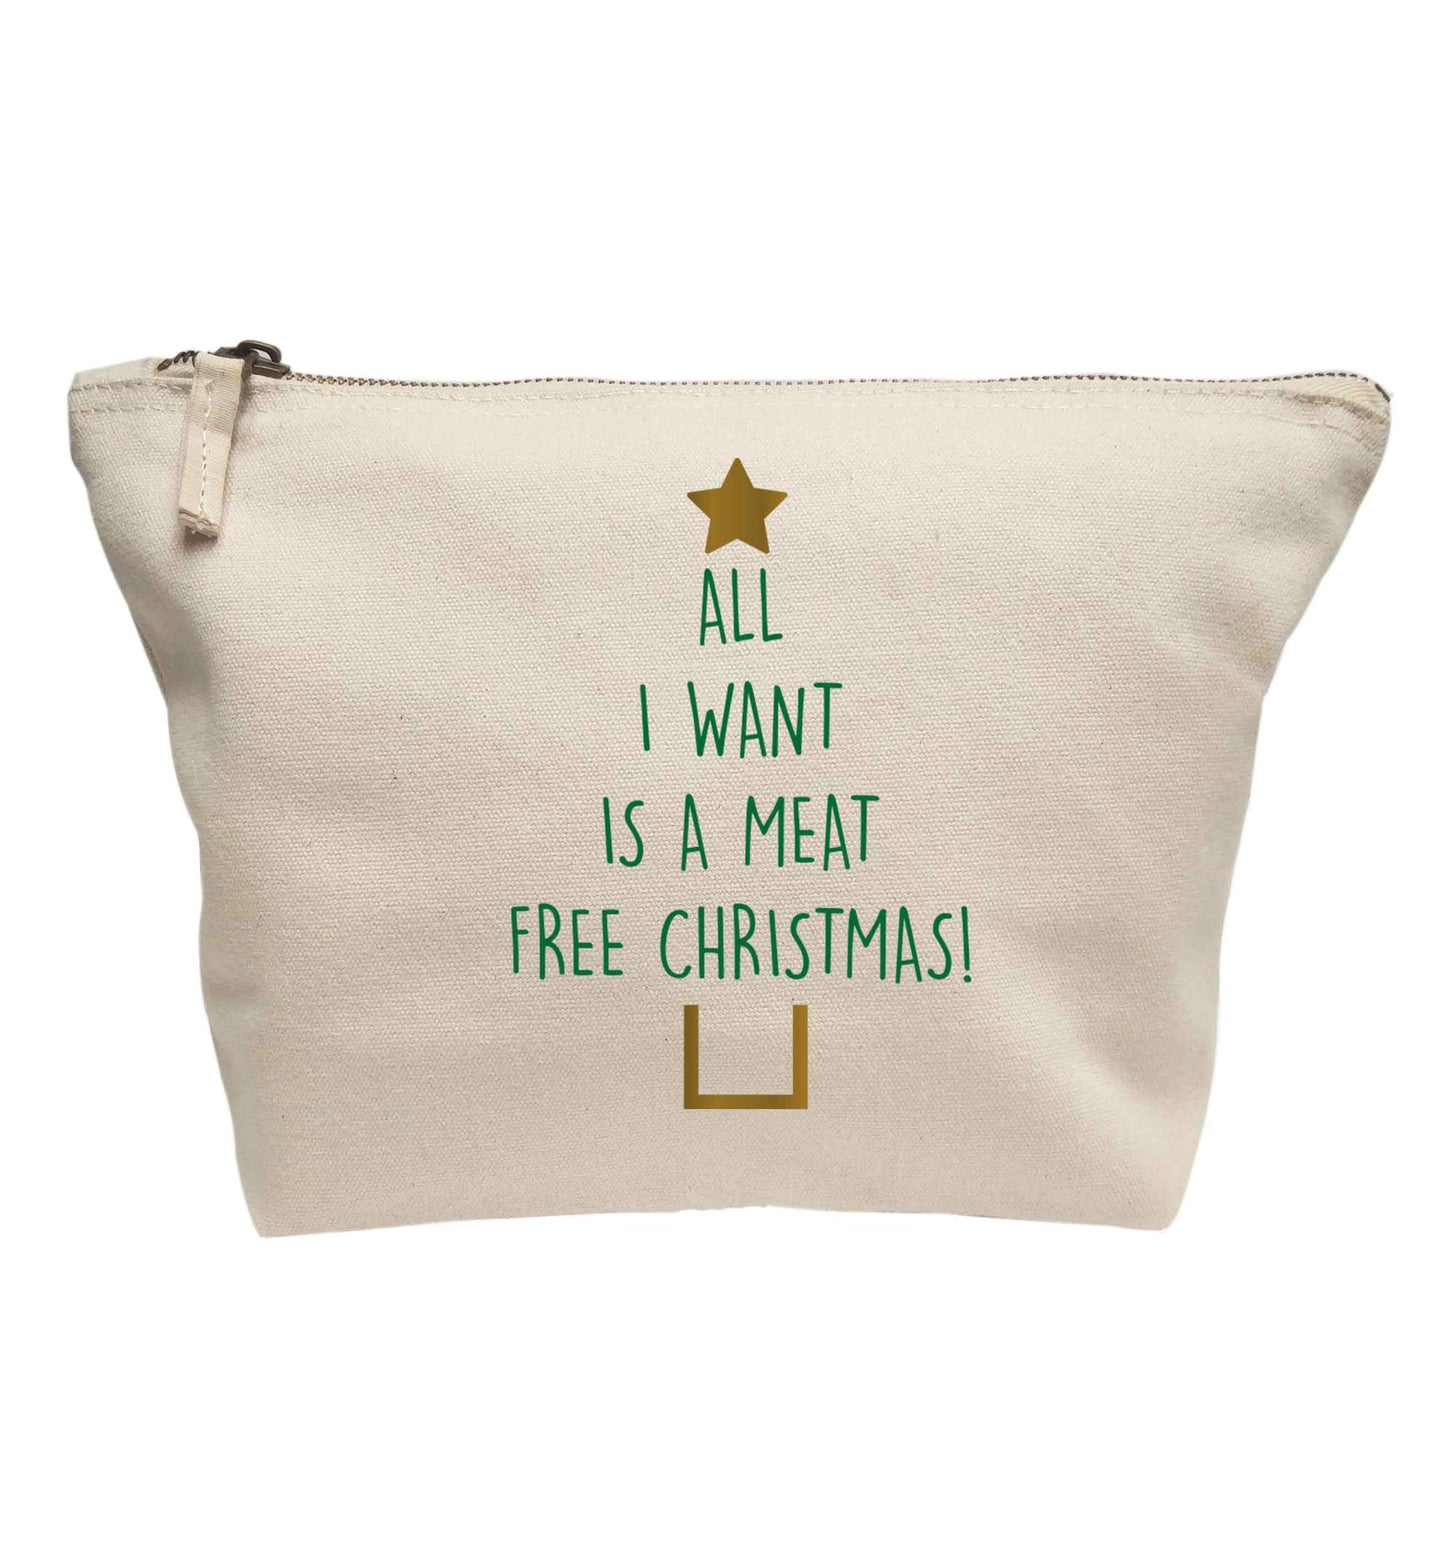 All I want is a meat free Christmas | makeup / wash bag